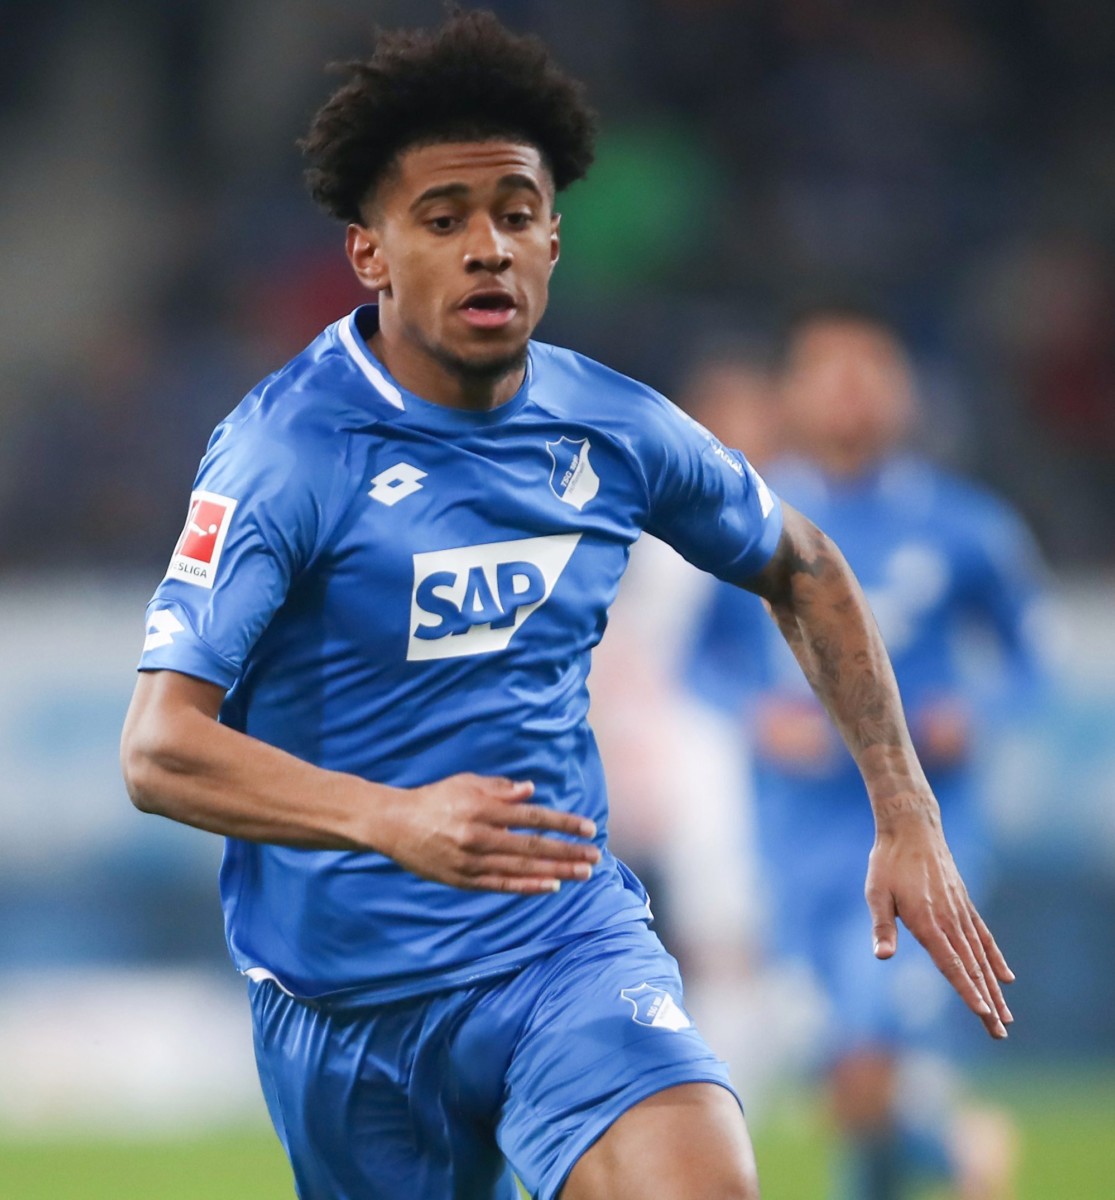 Nelson said his spell at Hoffenheim helped him become a man